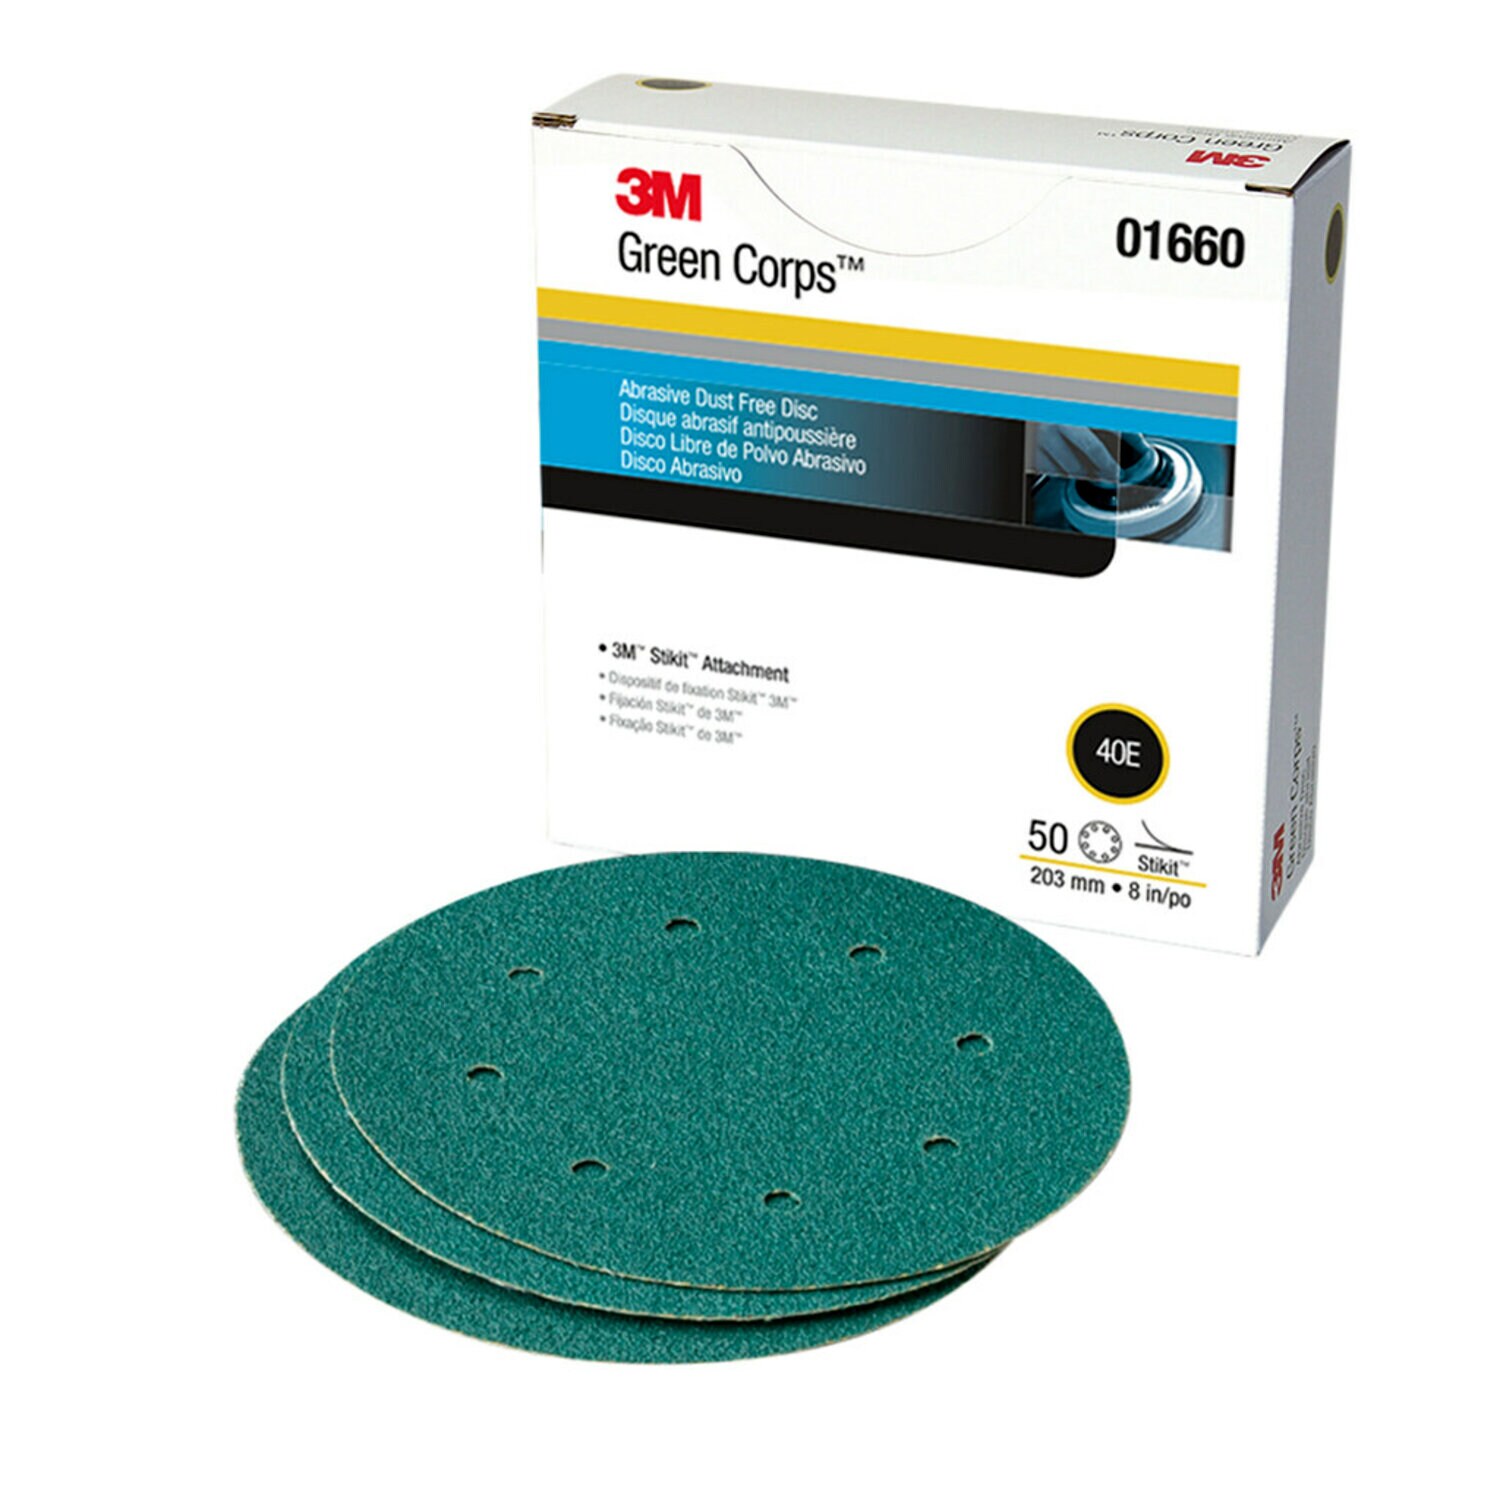 7010363759 - 3M Green Corps Stikit Production Disc Dust Free, 01660, 8 in, 40, 50
discs per carton, 5 cartons per case